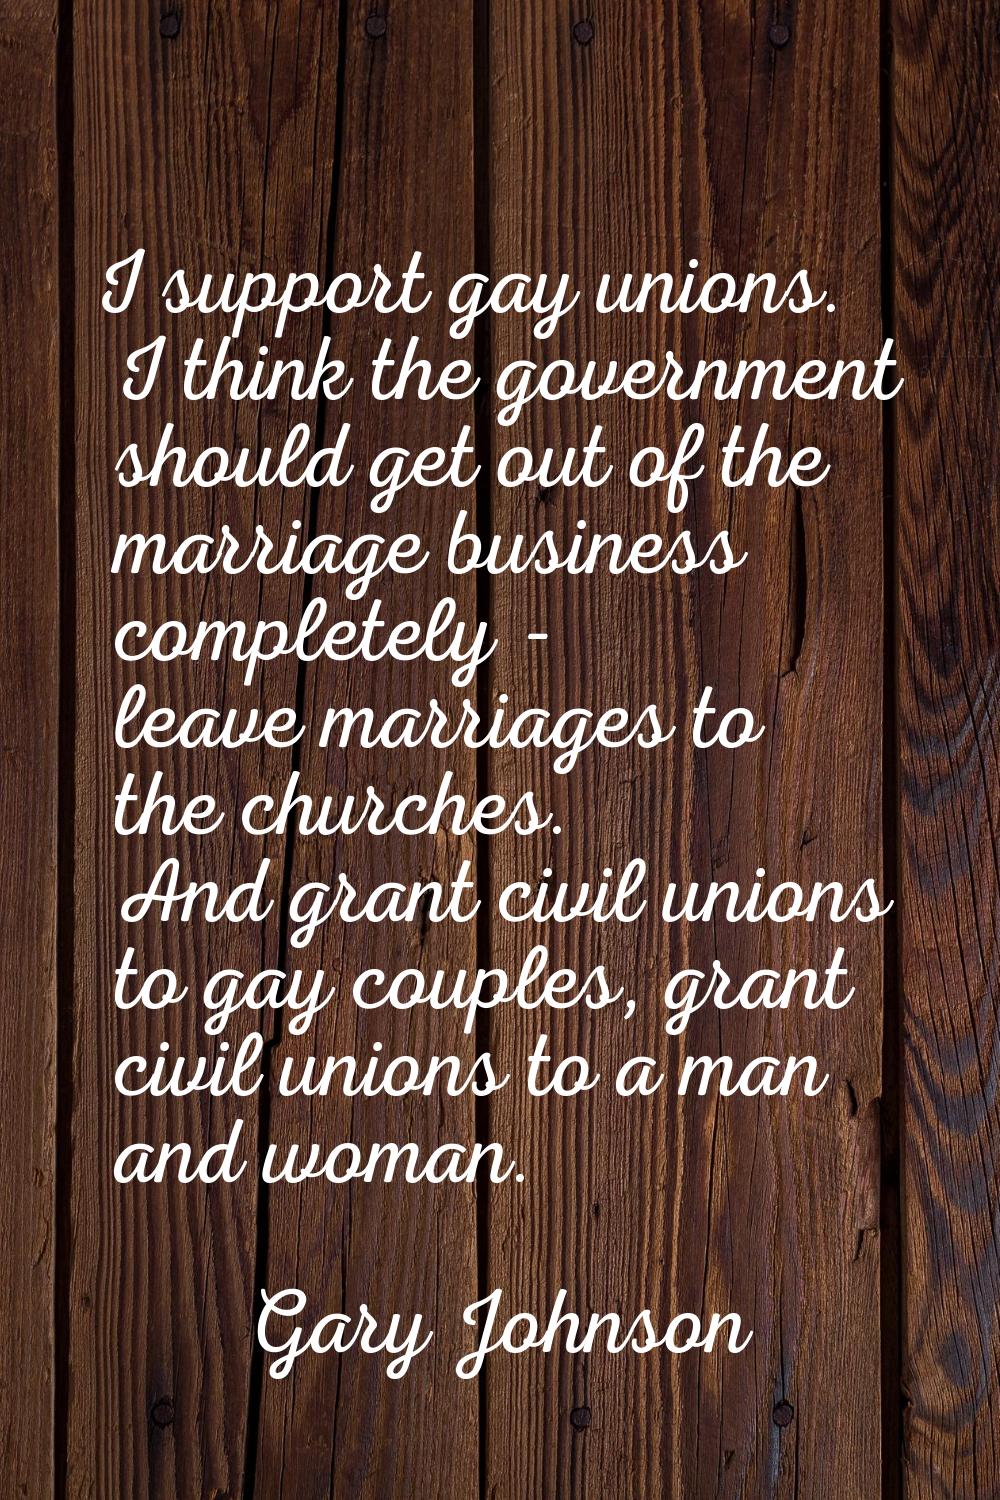 I support gay unions. I think the government should get out of the marriage business completely - l